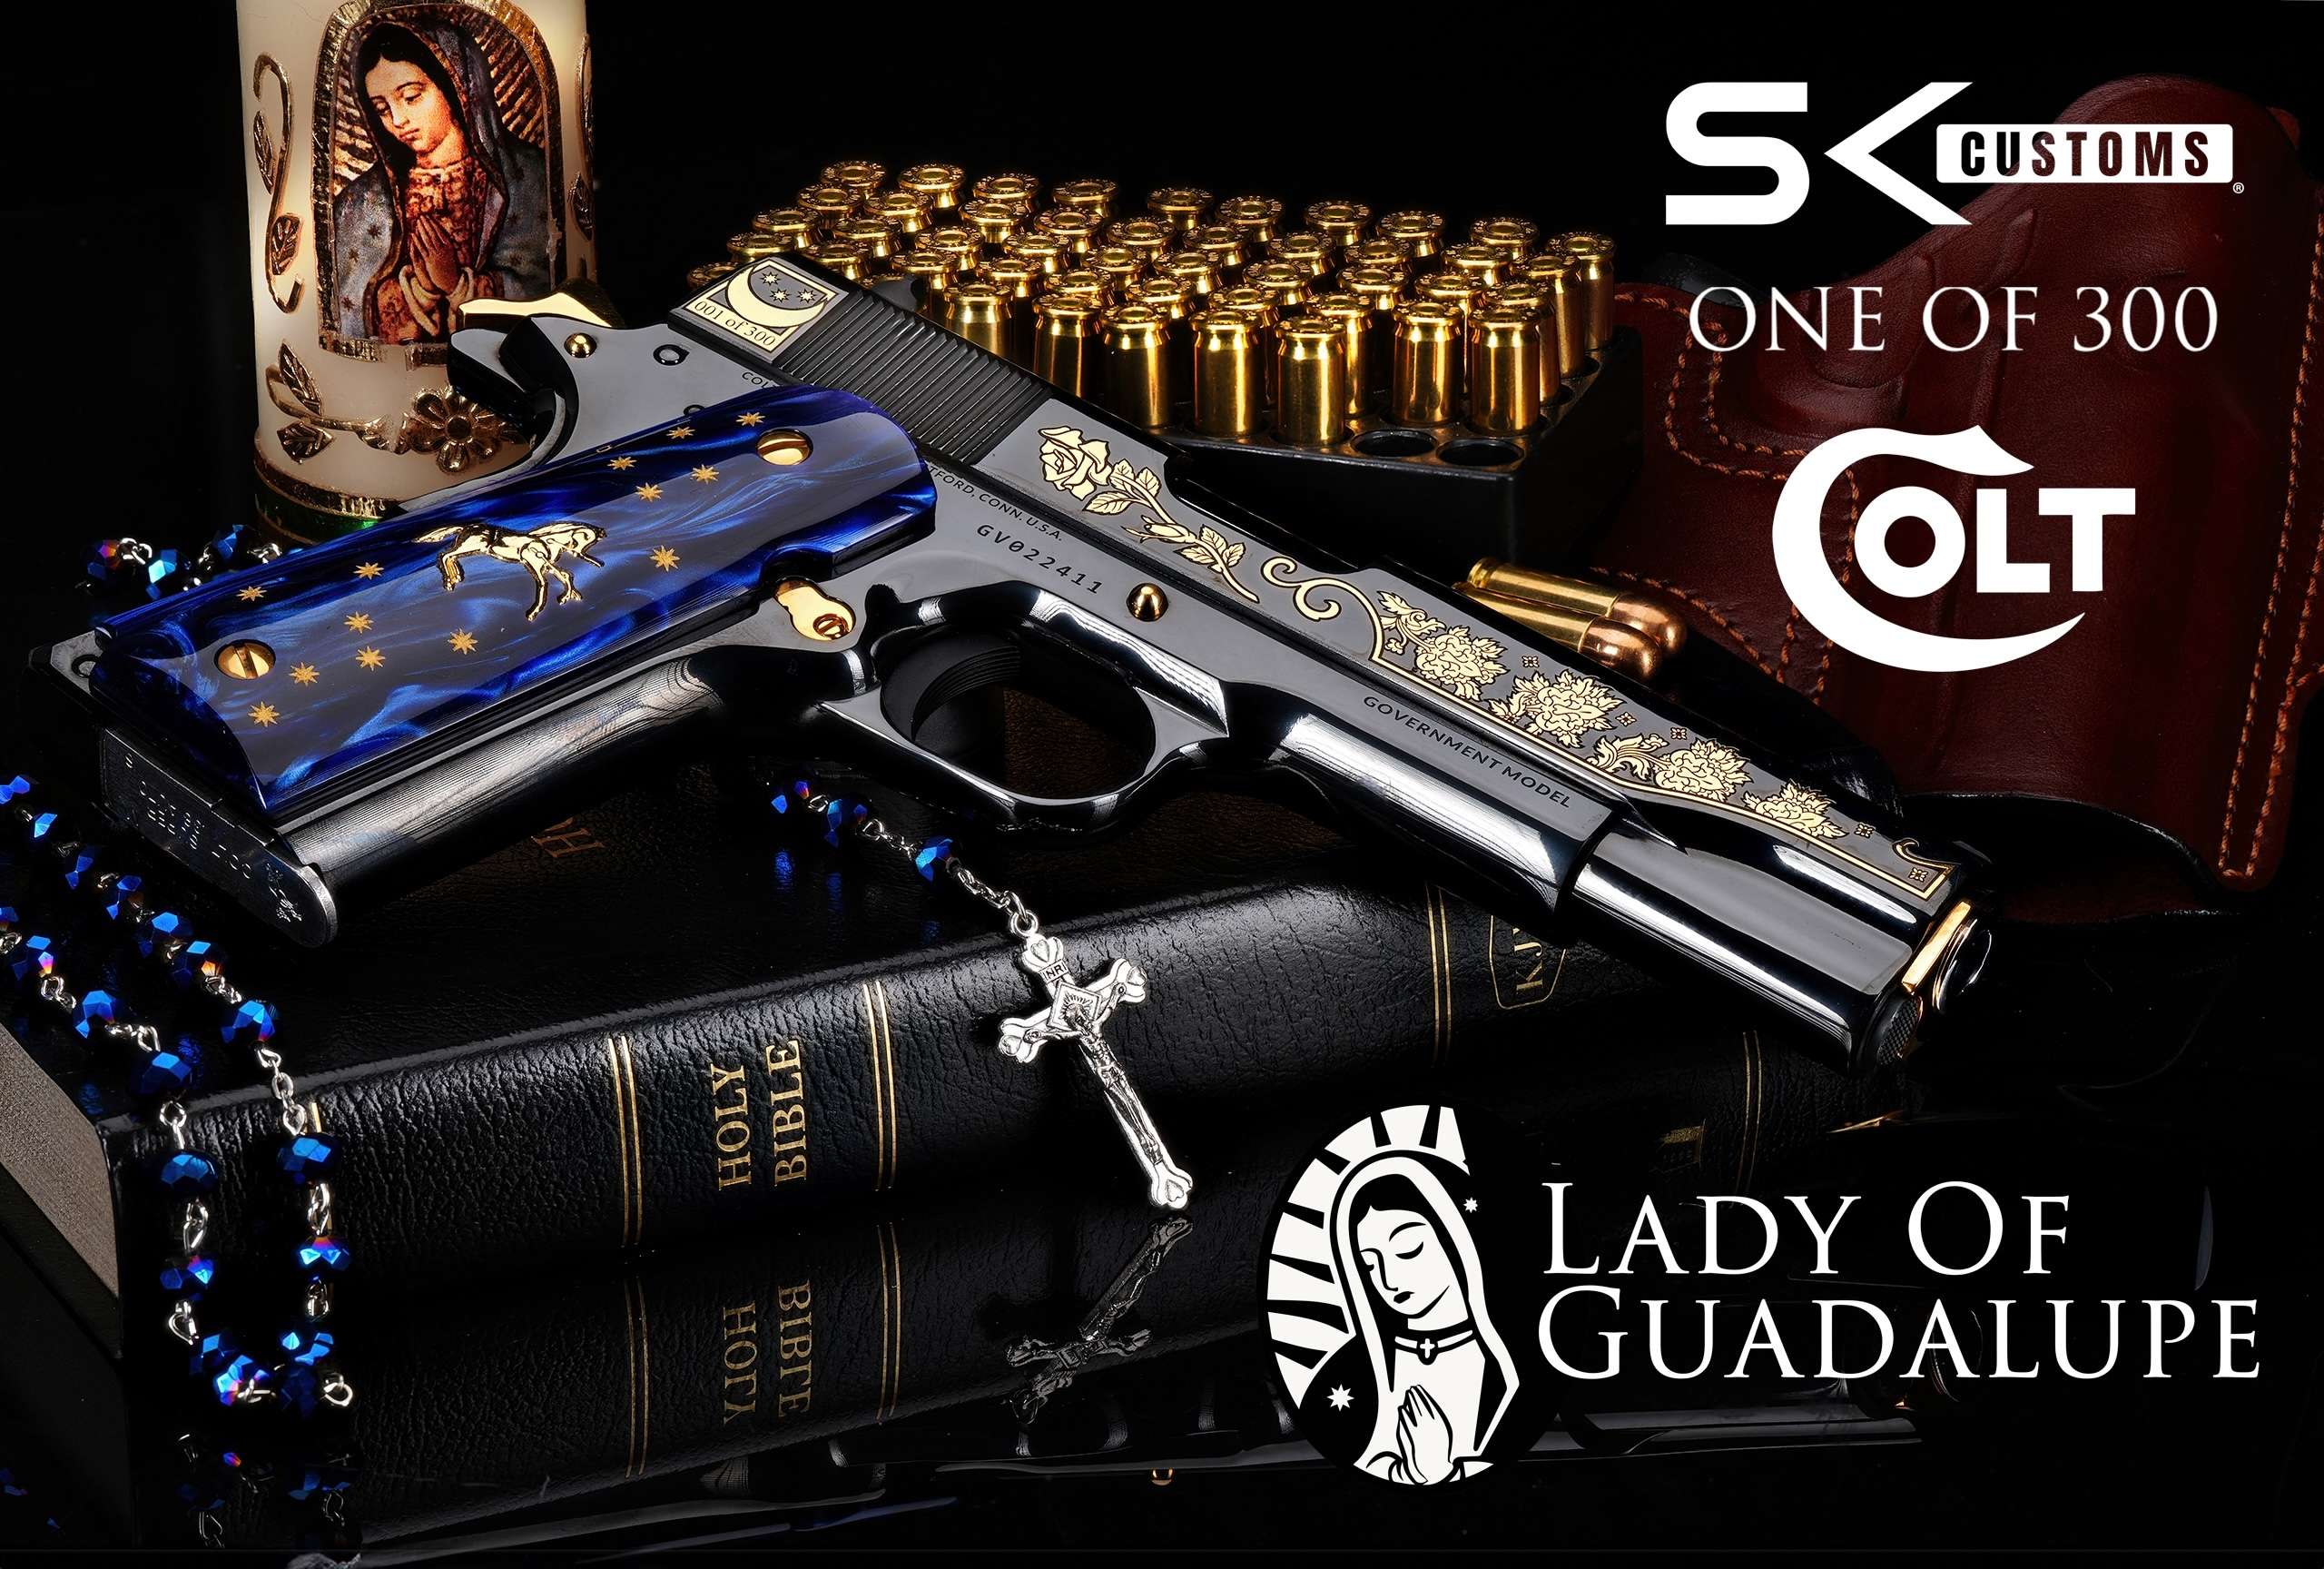 SK CUSTOMS COLT 1911 38 Super LADY OF GUADALUPE  #196 OF 300-img-0